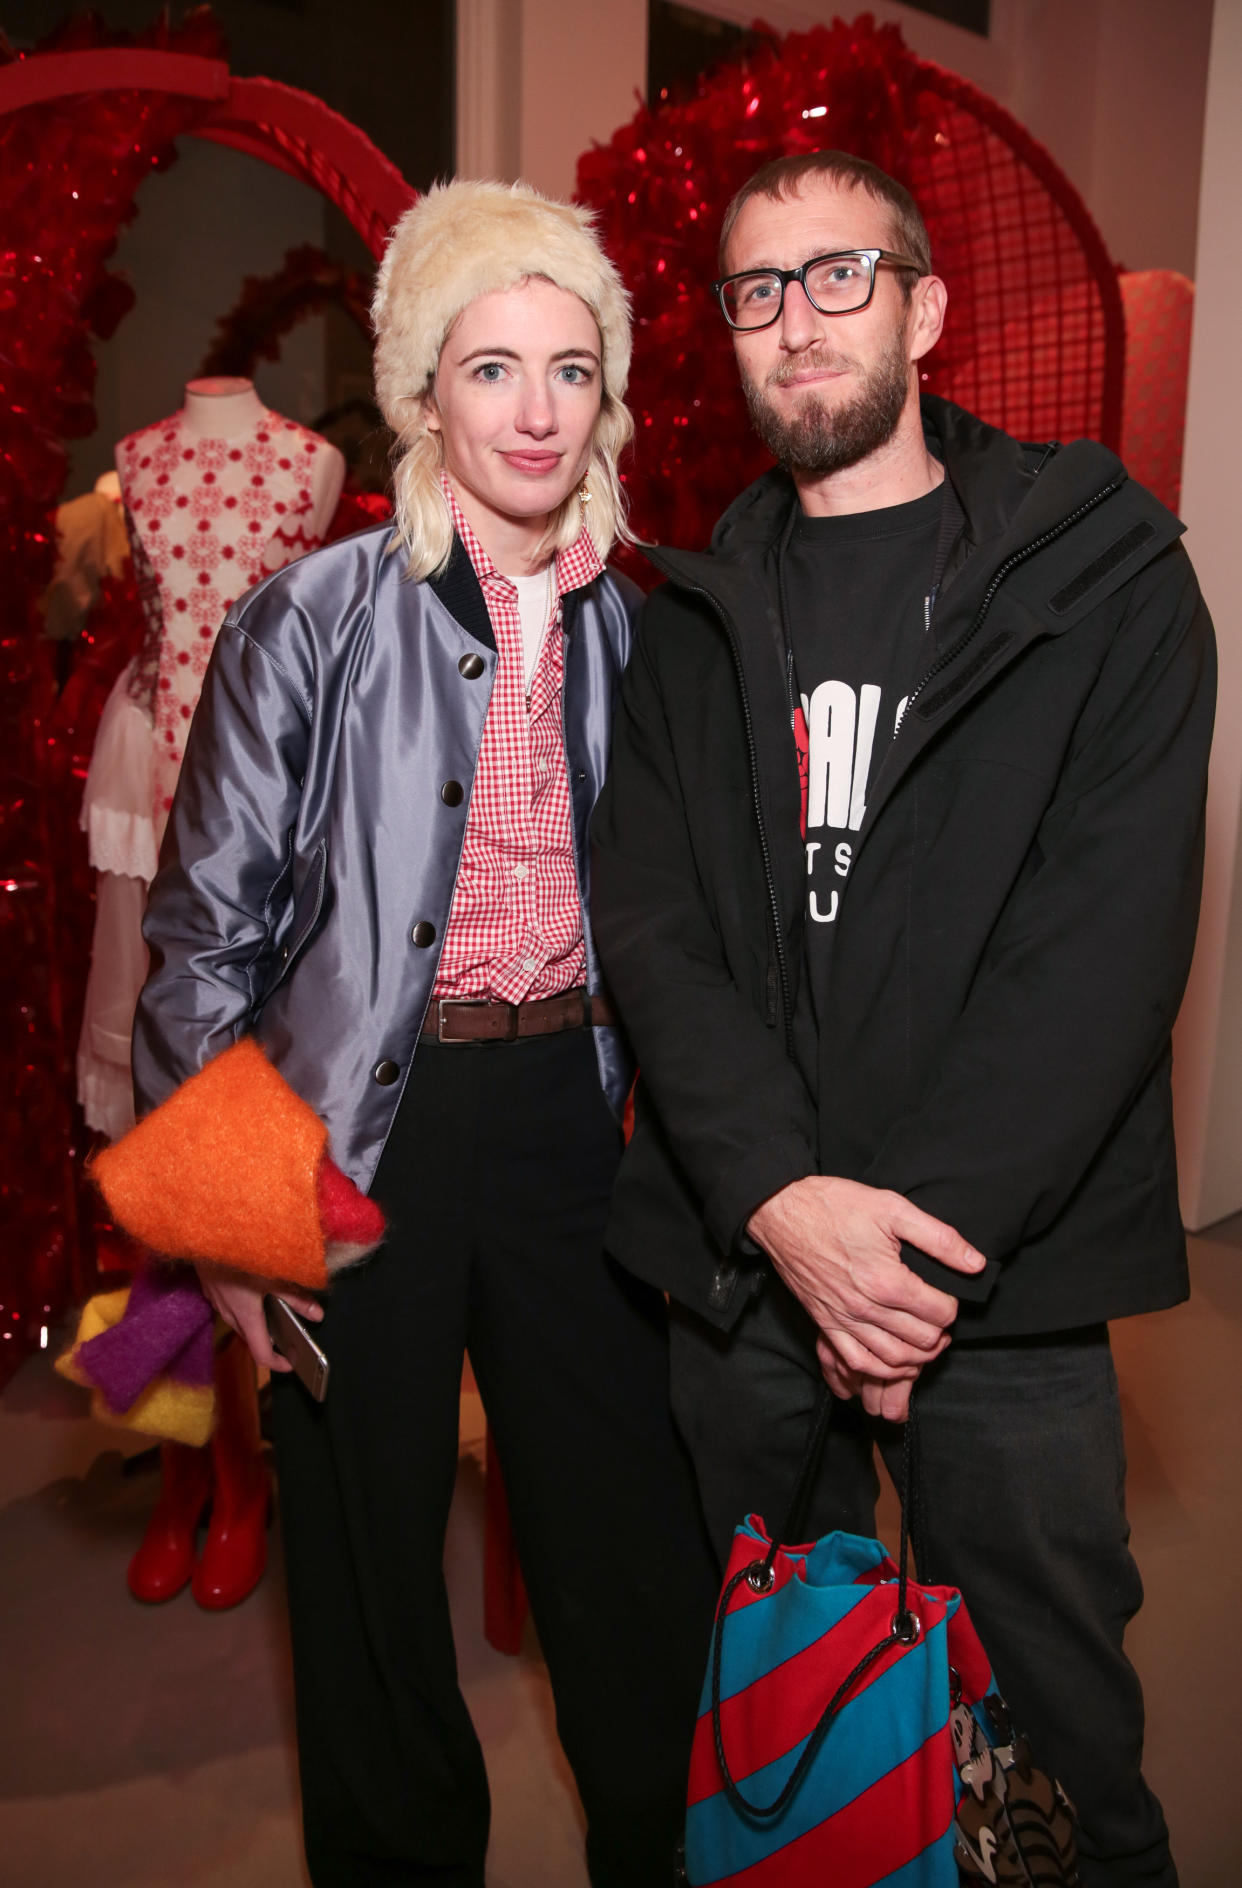 NEW YORK, NY - FEBRUARY 12:  Phoebe Arnold (L), and Clemens Weisshaar attend the opening of the first Simone Rocha US store on February 12, 2017 in New York City.  (Photo by CJ Rivera/Getty Images)